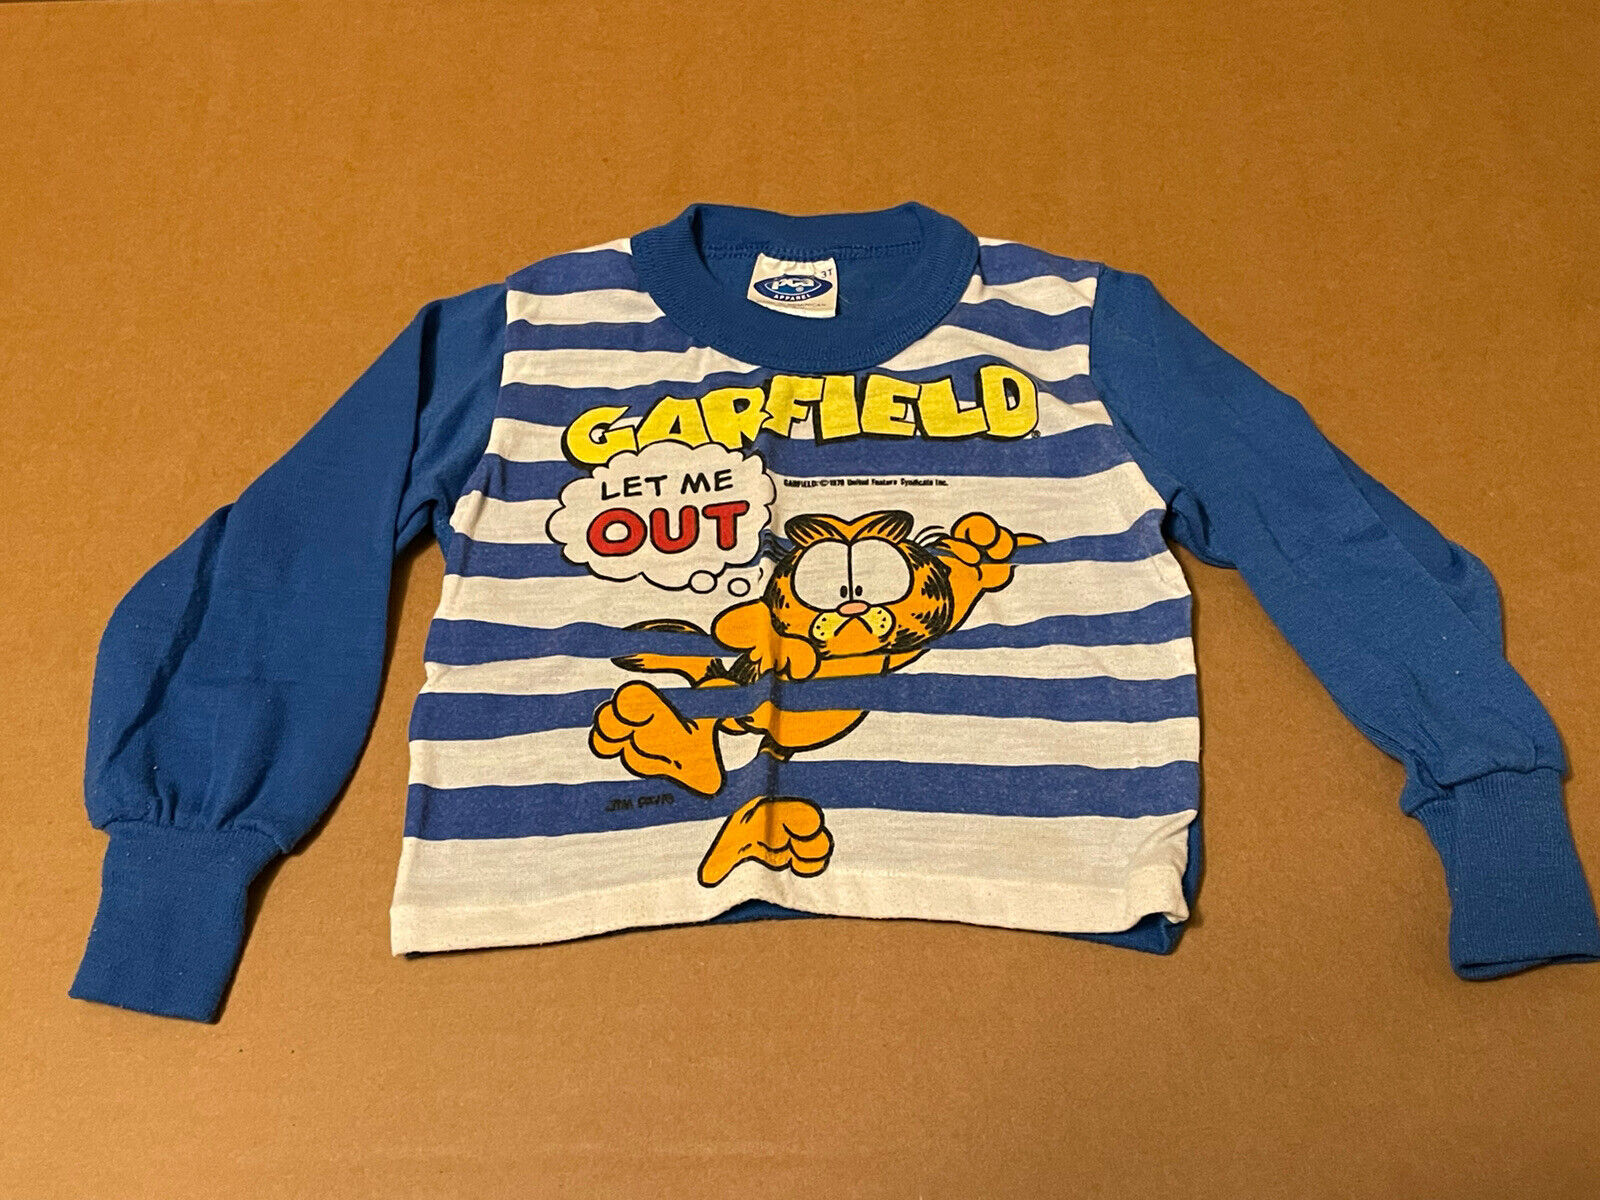 Vintage 1980s Garfield “let Me Out” Youth Child 3t Fleece Pajama Shirt *rare*